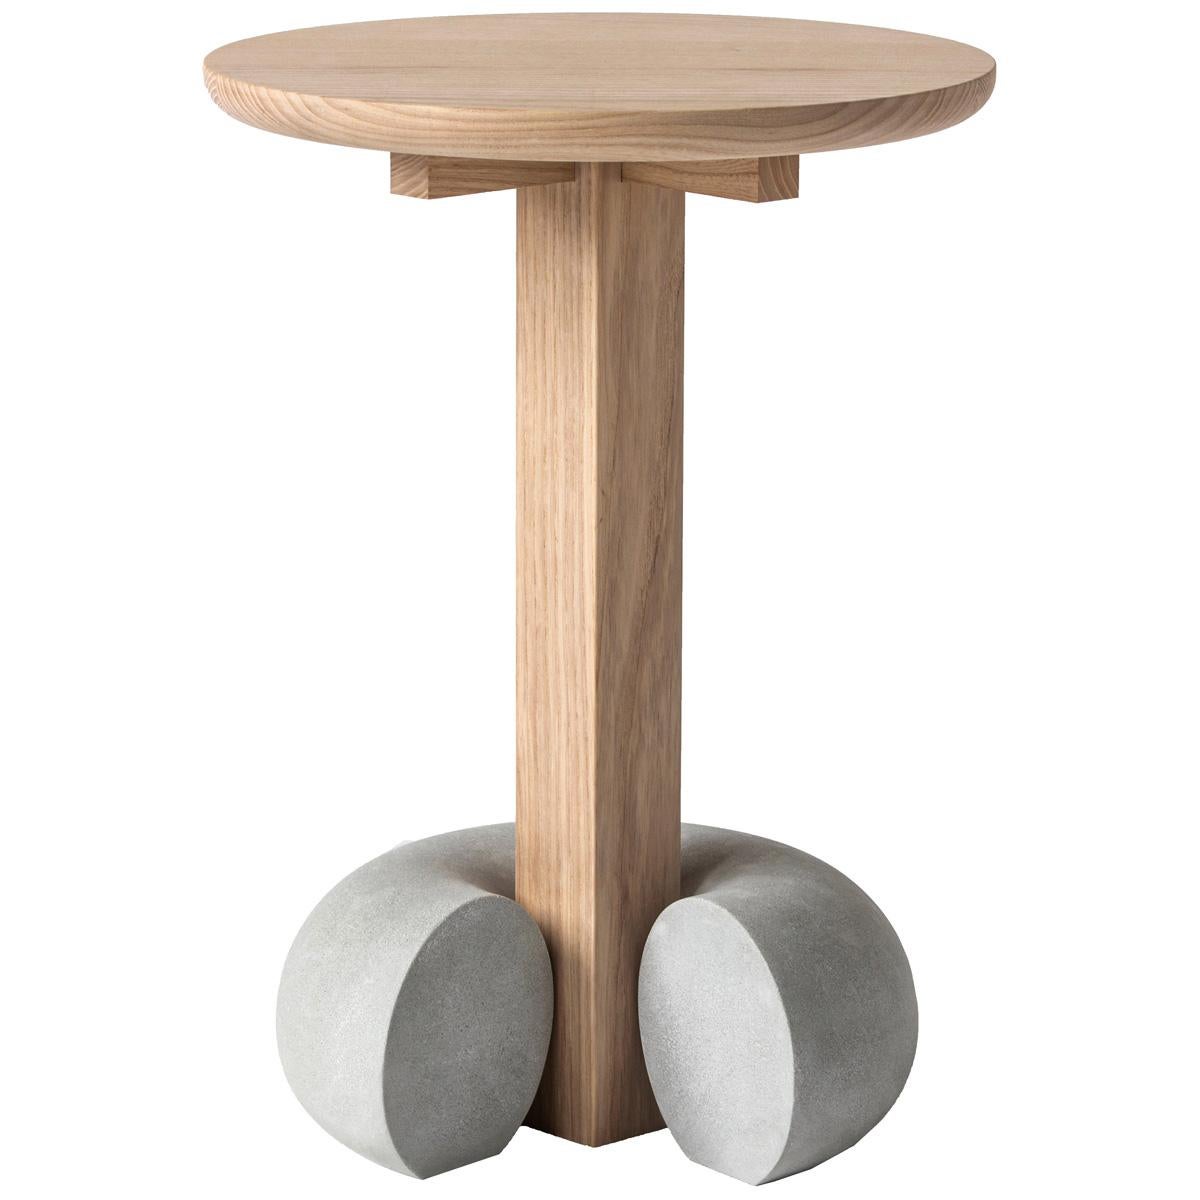 Poise Contemporary Stool Table in Solid Ash Hardwood and Concrete For Sale